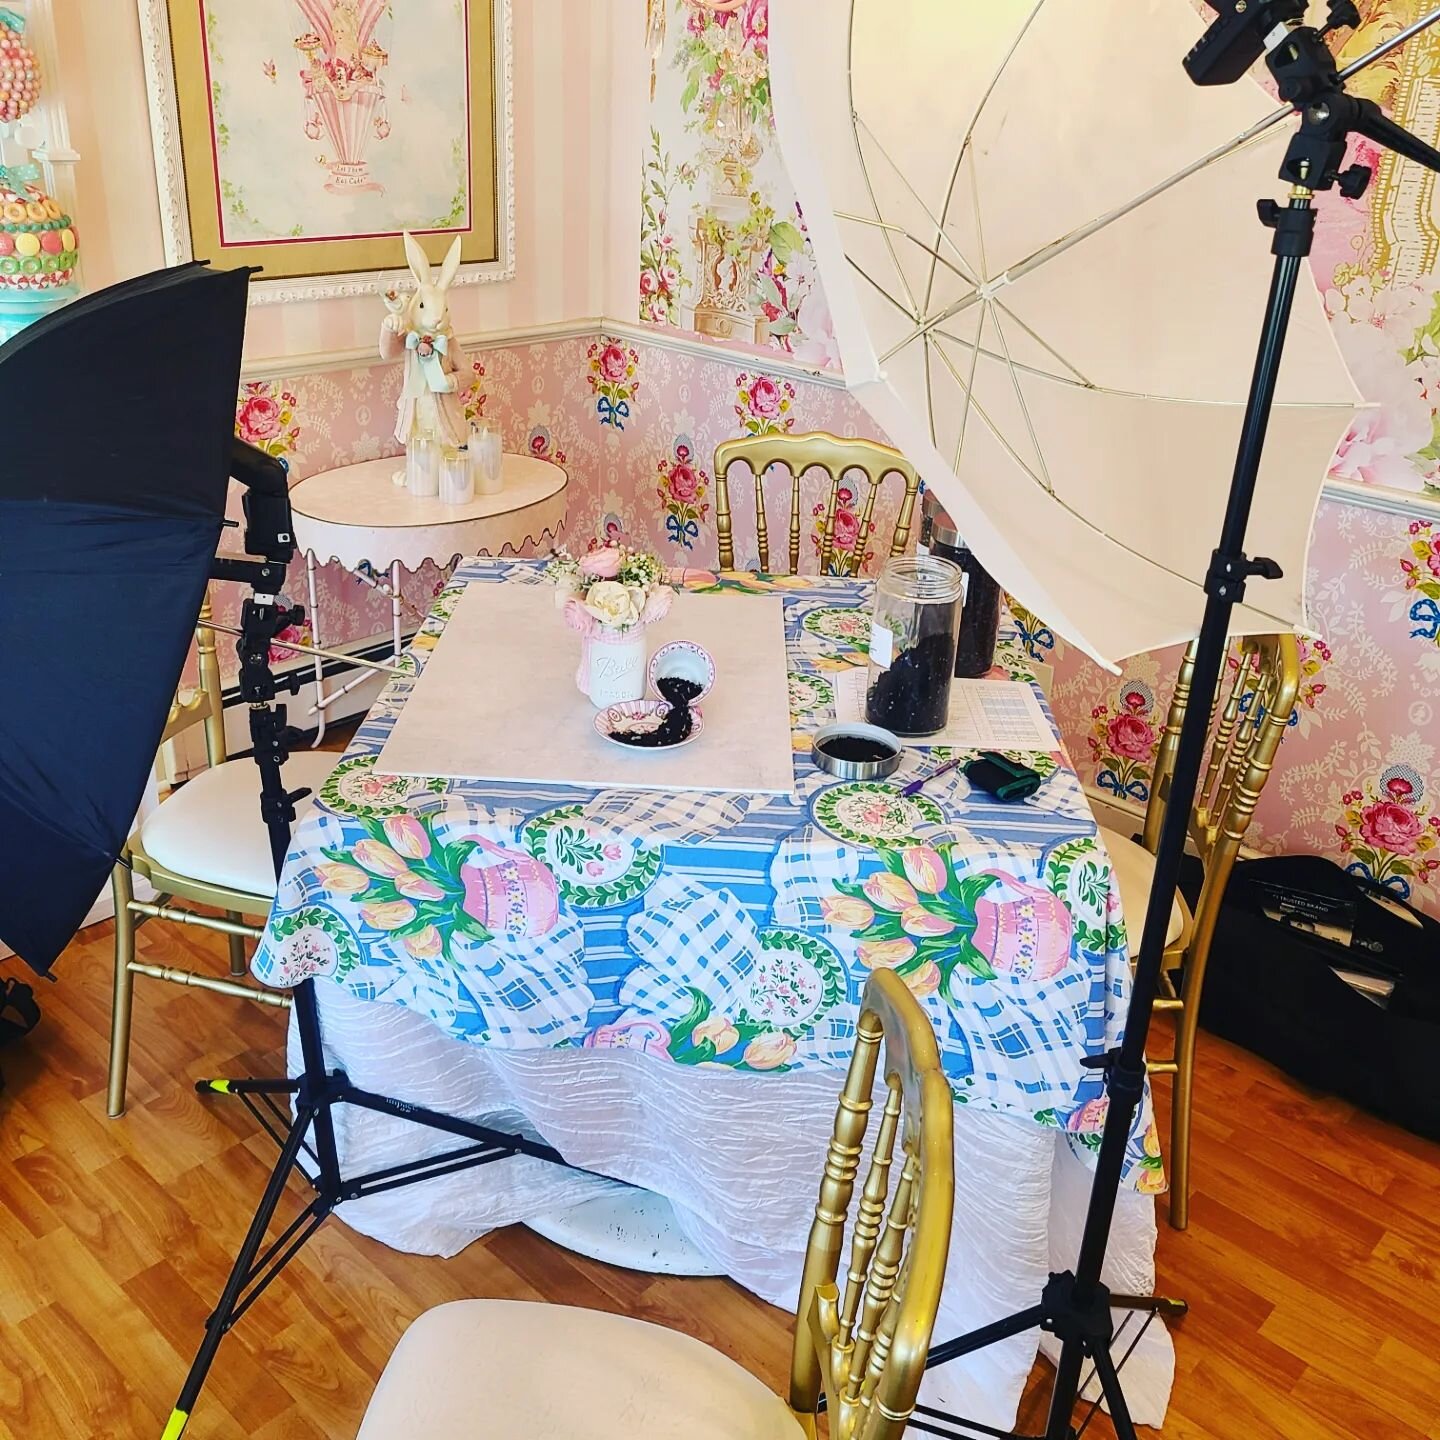 🫖We've been working on taking product/stylized photos of Fancy That's loose leaf teas over the past few weeks.

📸 We have a few more days of shooting ahead of us and cannot wait for you all to see the final product. 😀 

In the meantime, go show th